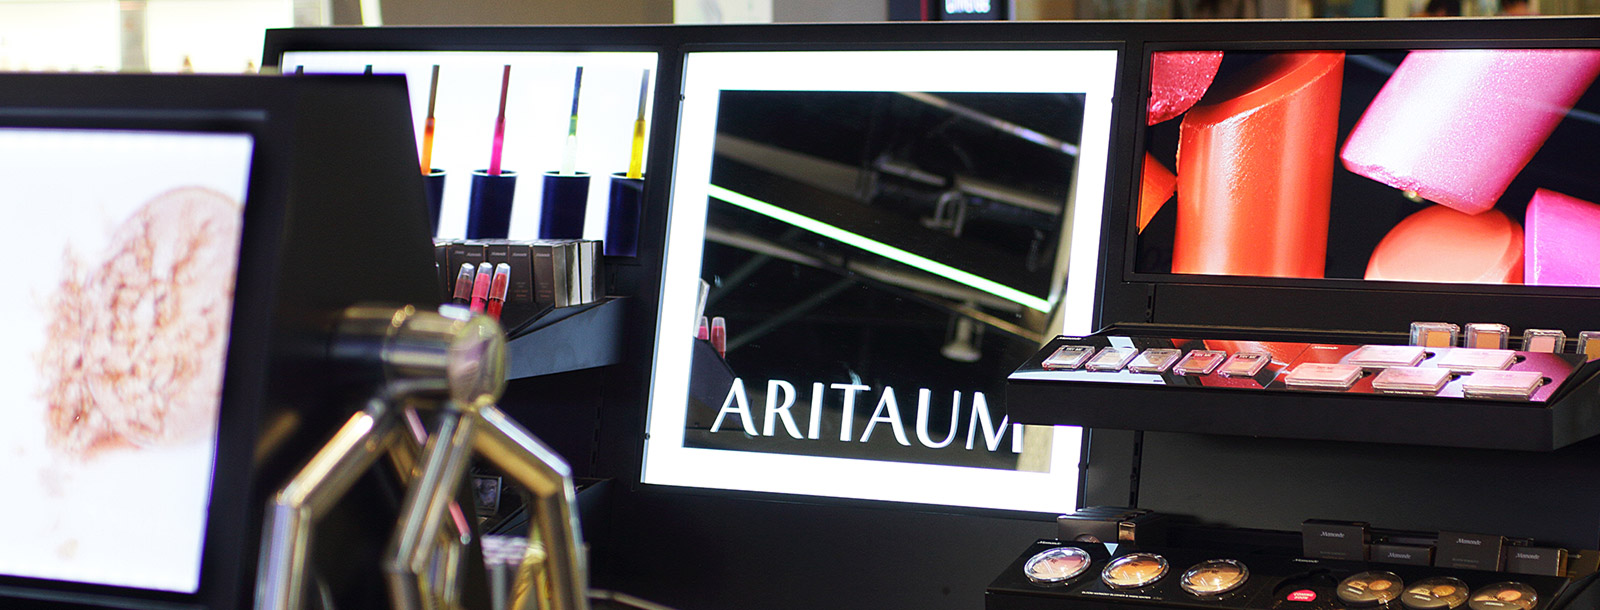 ARITAUM, an immensely popular South Korean cosmetic brand with over 1,300 shops globally. ARITAUM has garnered a large following from Canadian consumers looking for cosmetics and products that traditionally can only be found in Asia.